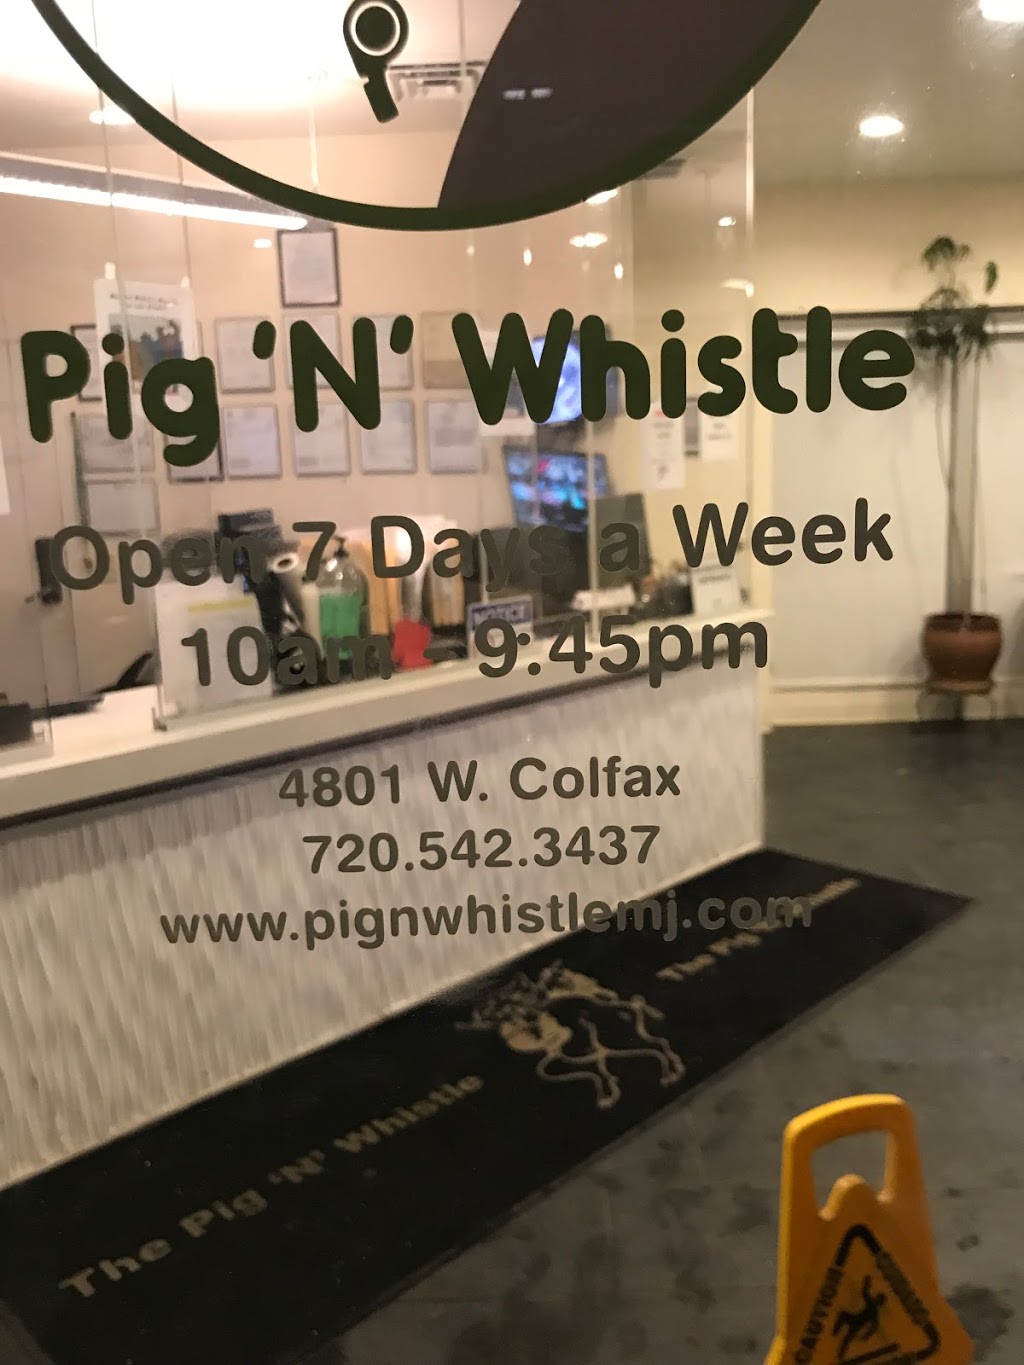 The Pig N Whistle Recreational & Medical Dispensary | 4801 W Colfax Ave, Denver, CO 80204 | Phone: (720) 542-3437